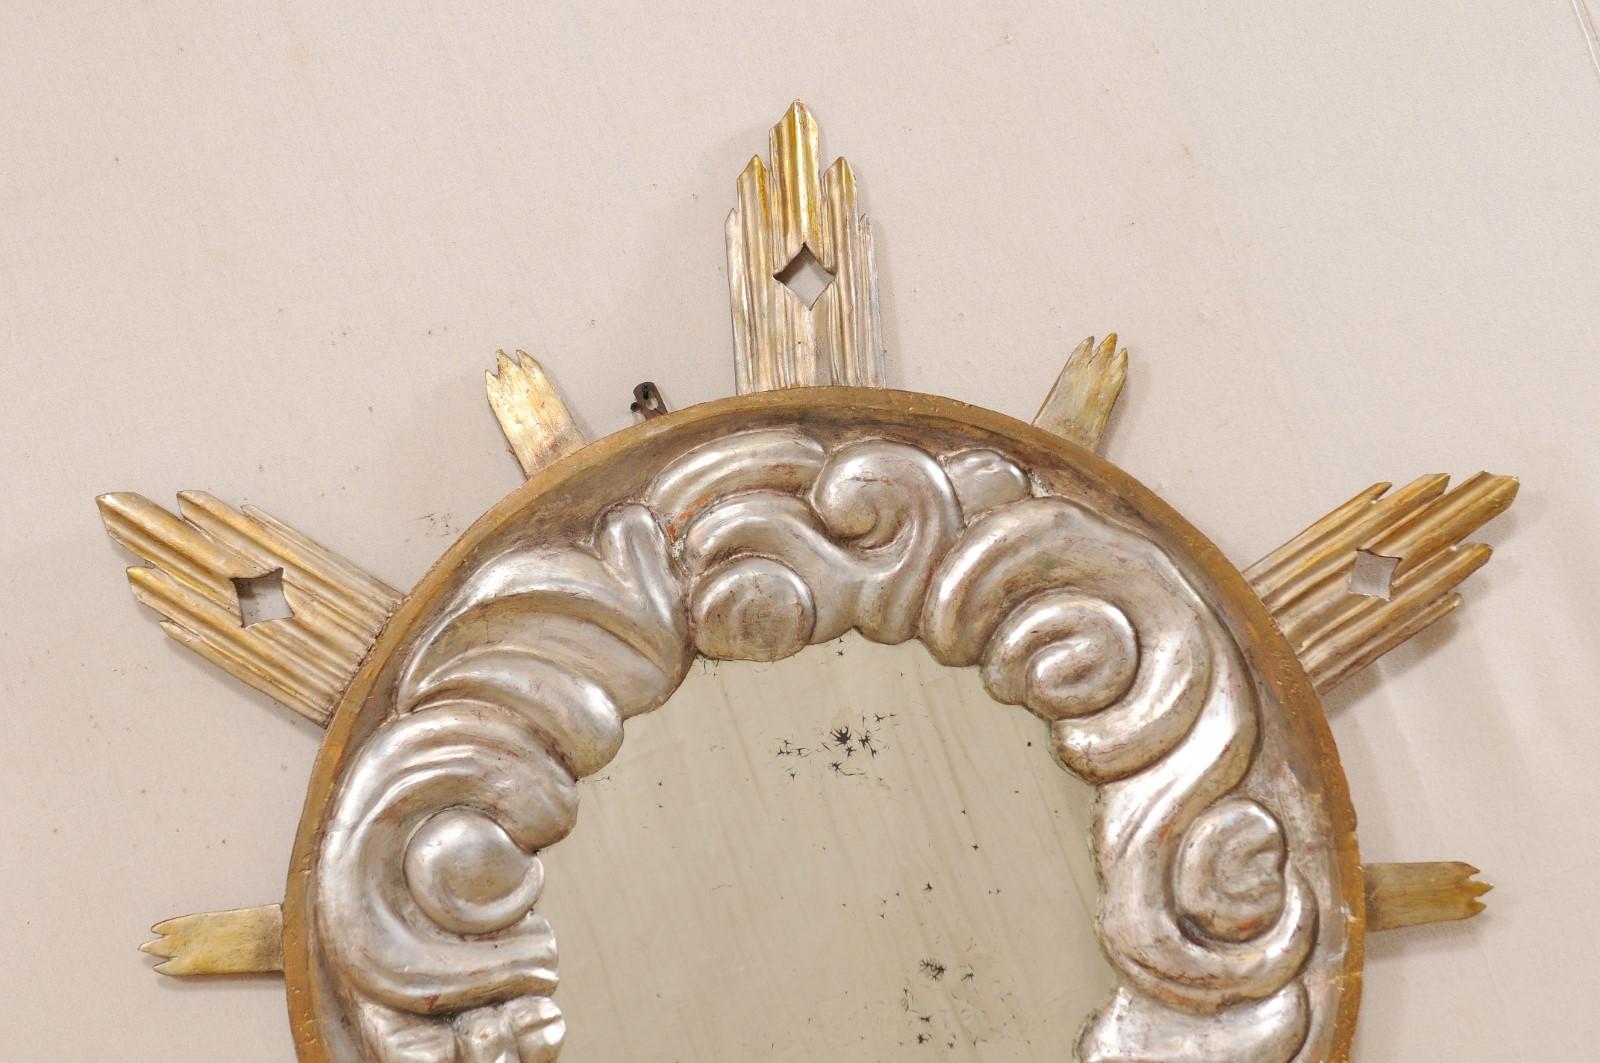 Hand-Carved Italian 4 Ft Tall Cloudy Ray Sunburst Mirror in Gold & Silver, 19th Century